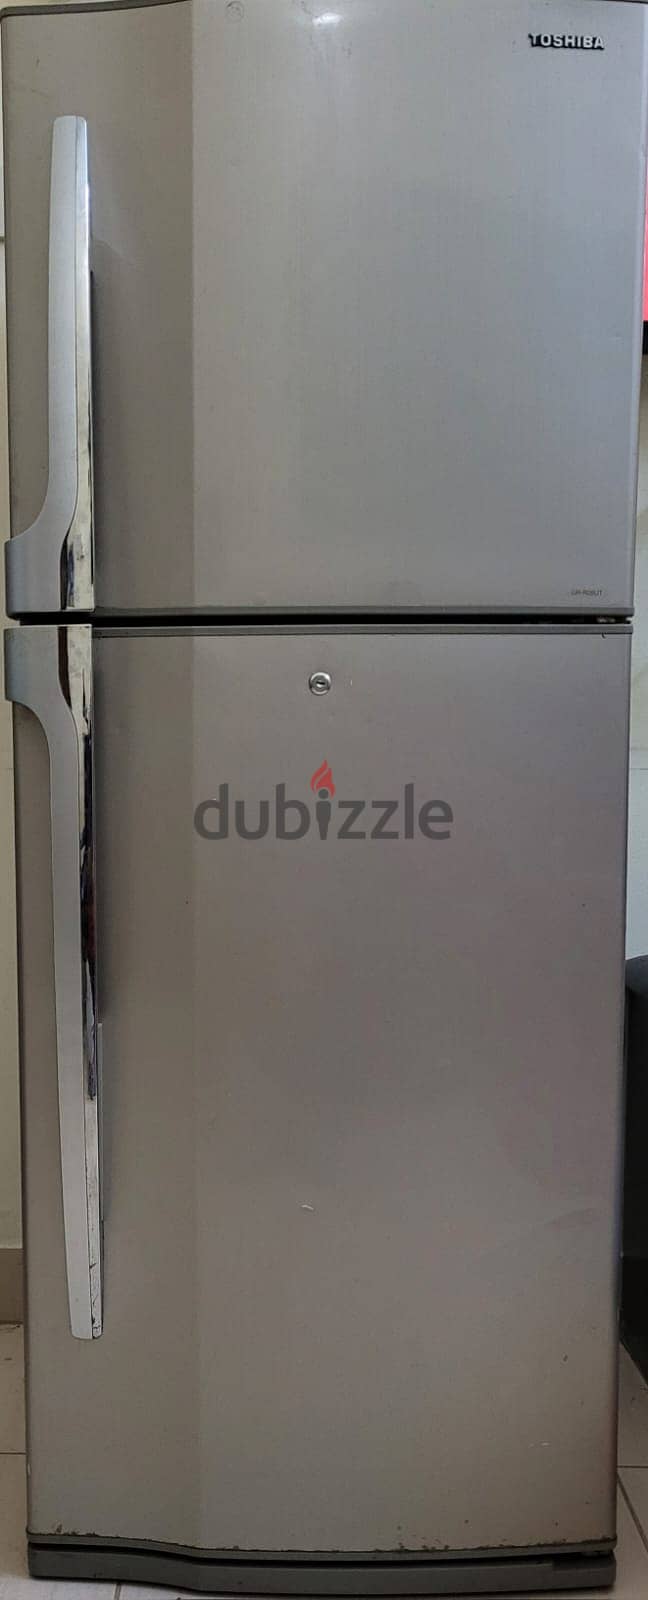 Toshiba GR-R28UT Refrigerator:Affordable and GREAT CONDITION 0